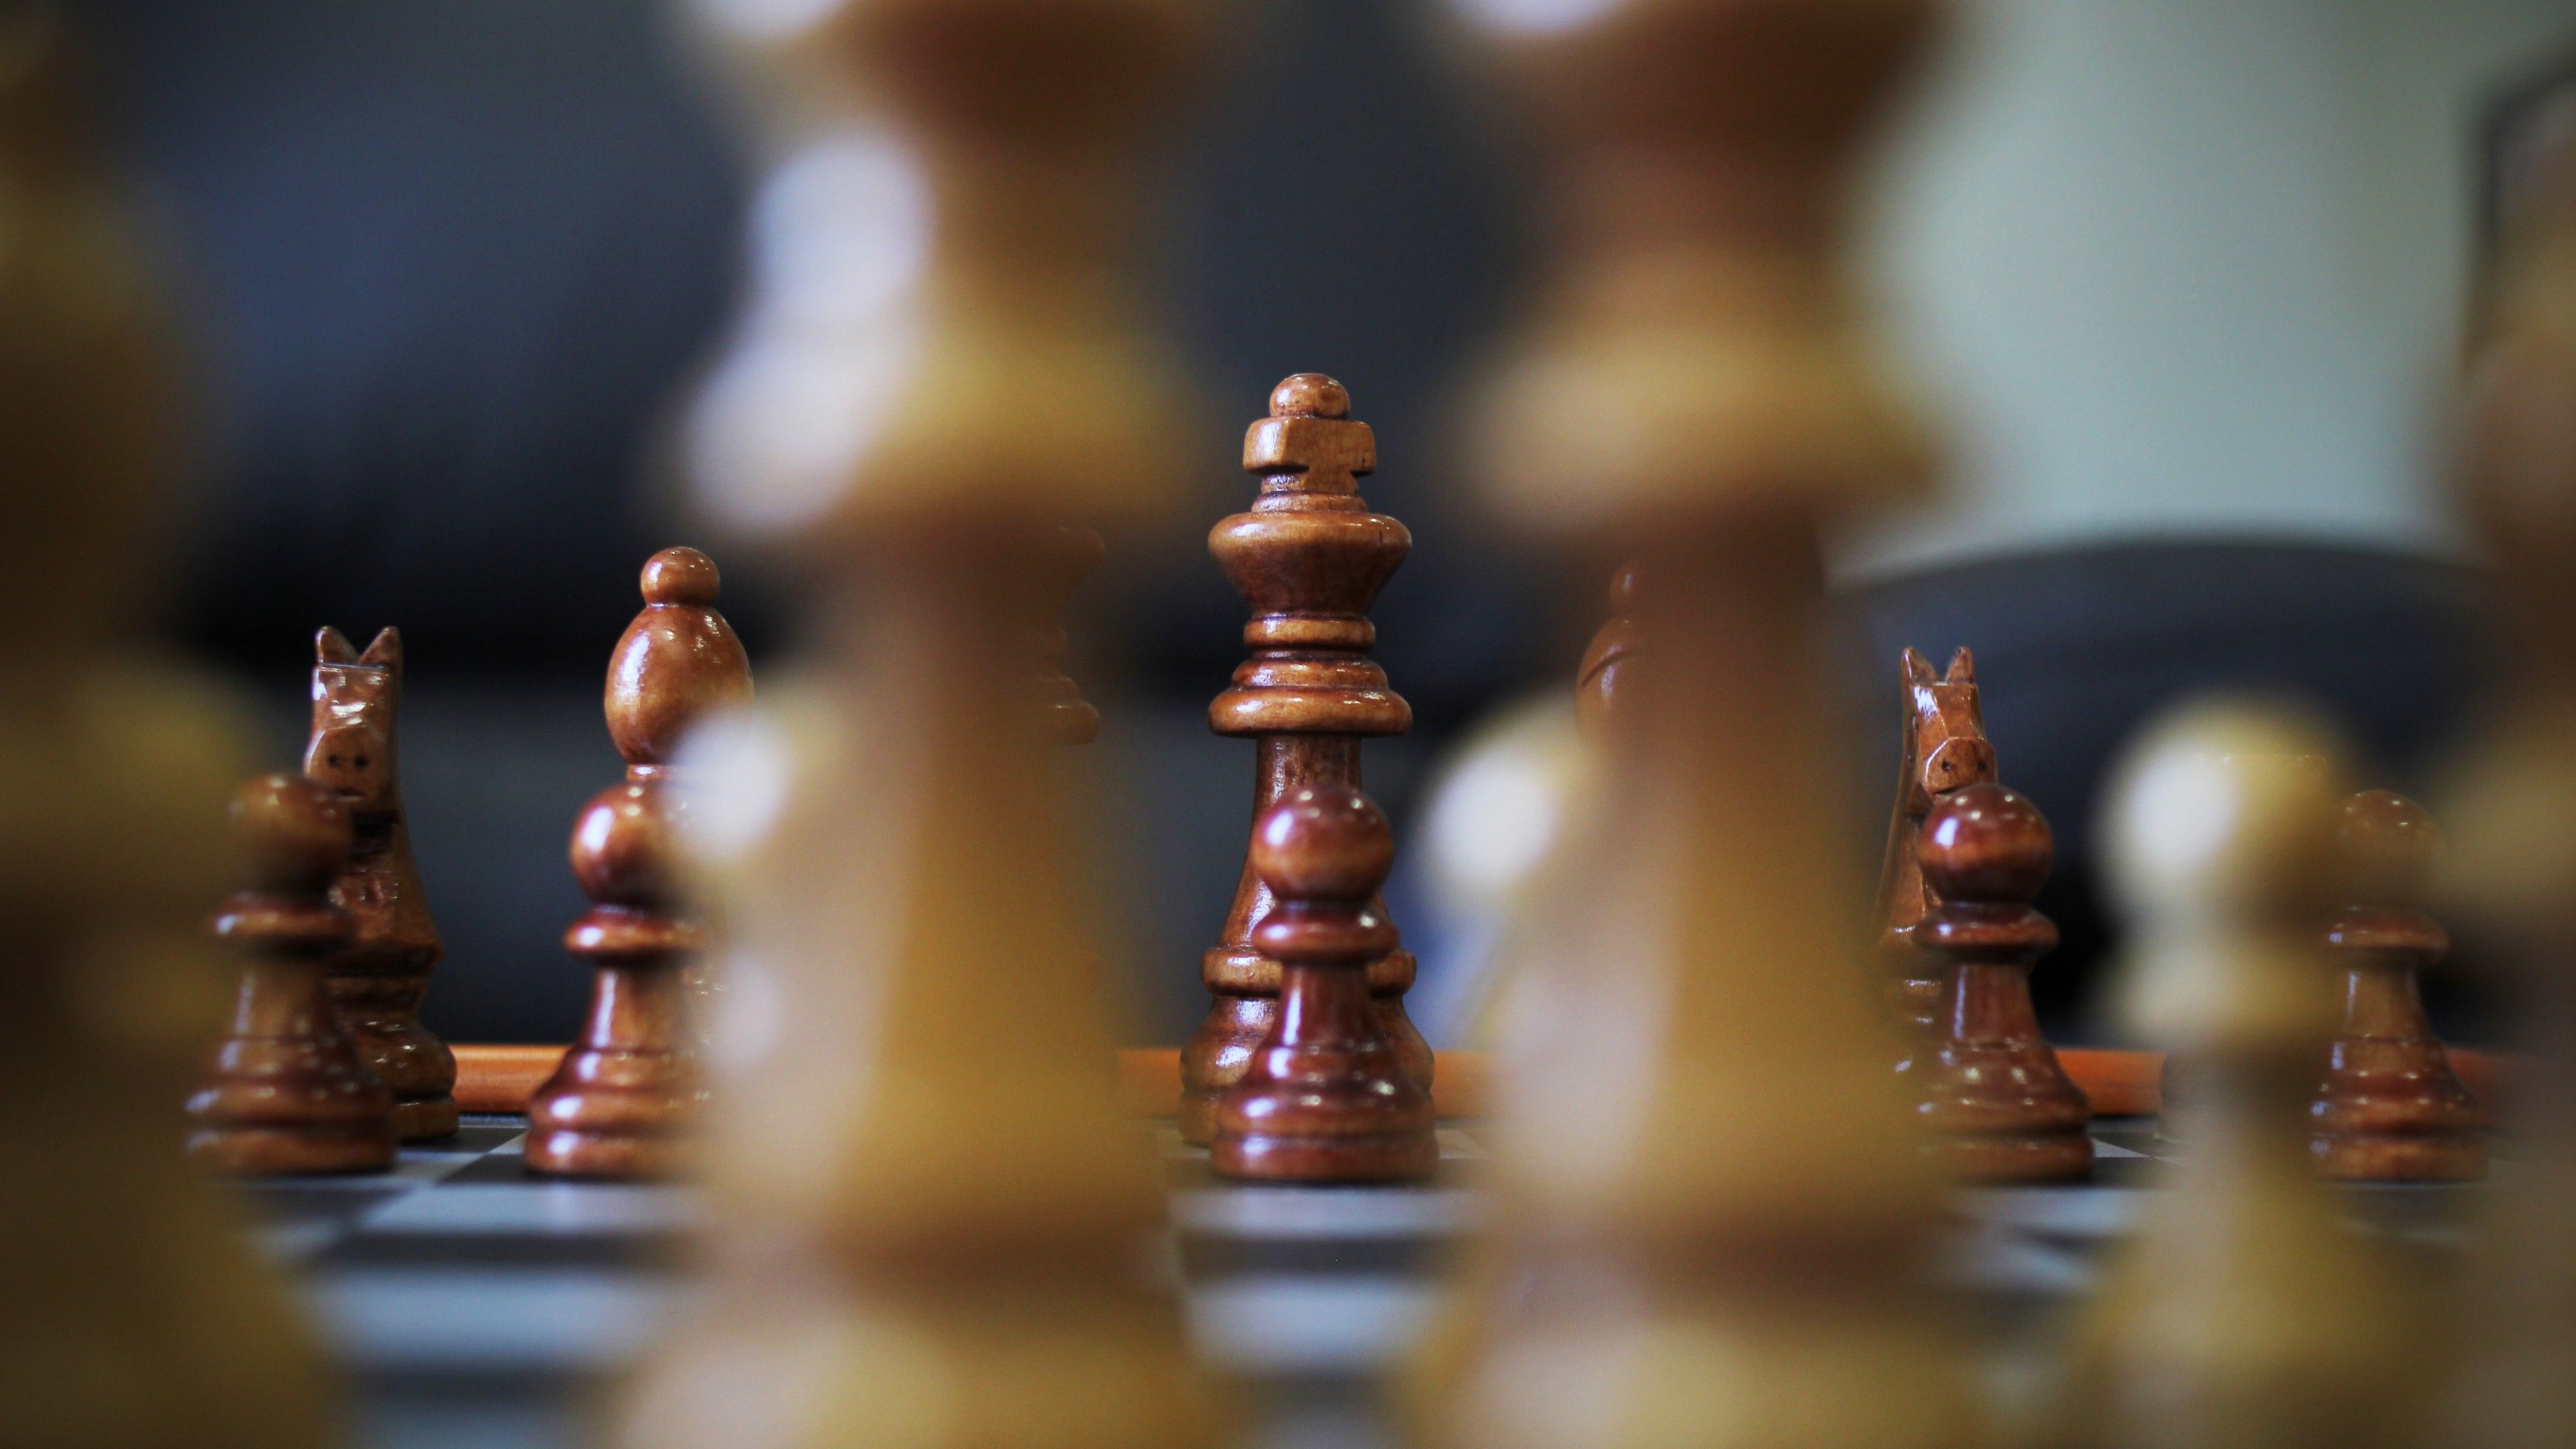 Chess Pieces HD Wallpaper for Desktop and Mobiles 4K Ultra HD